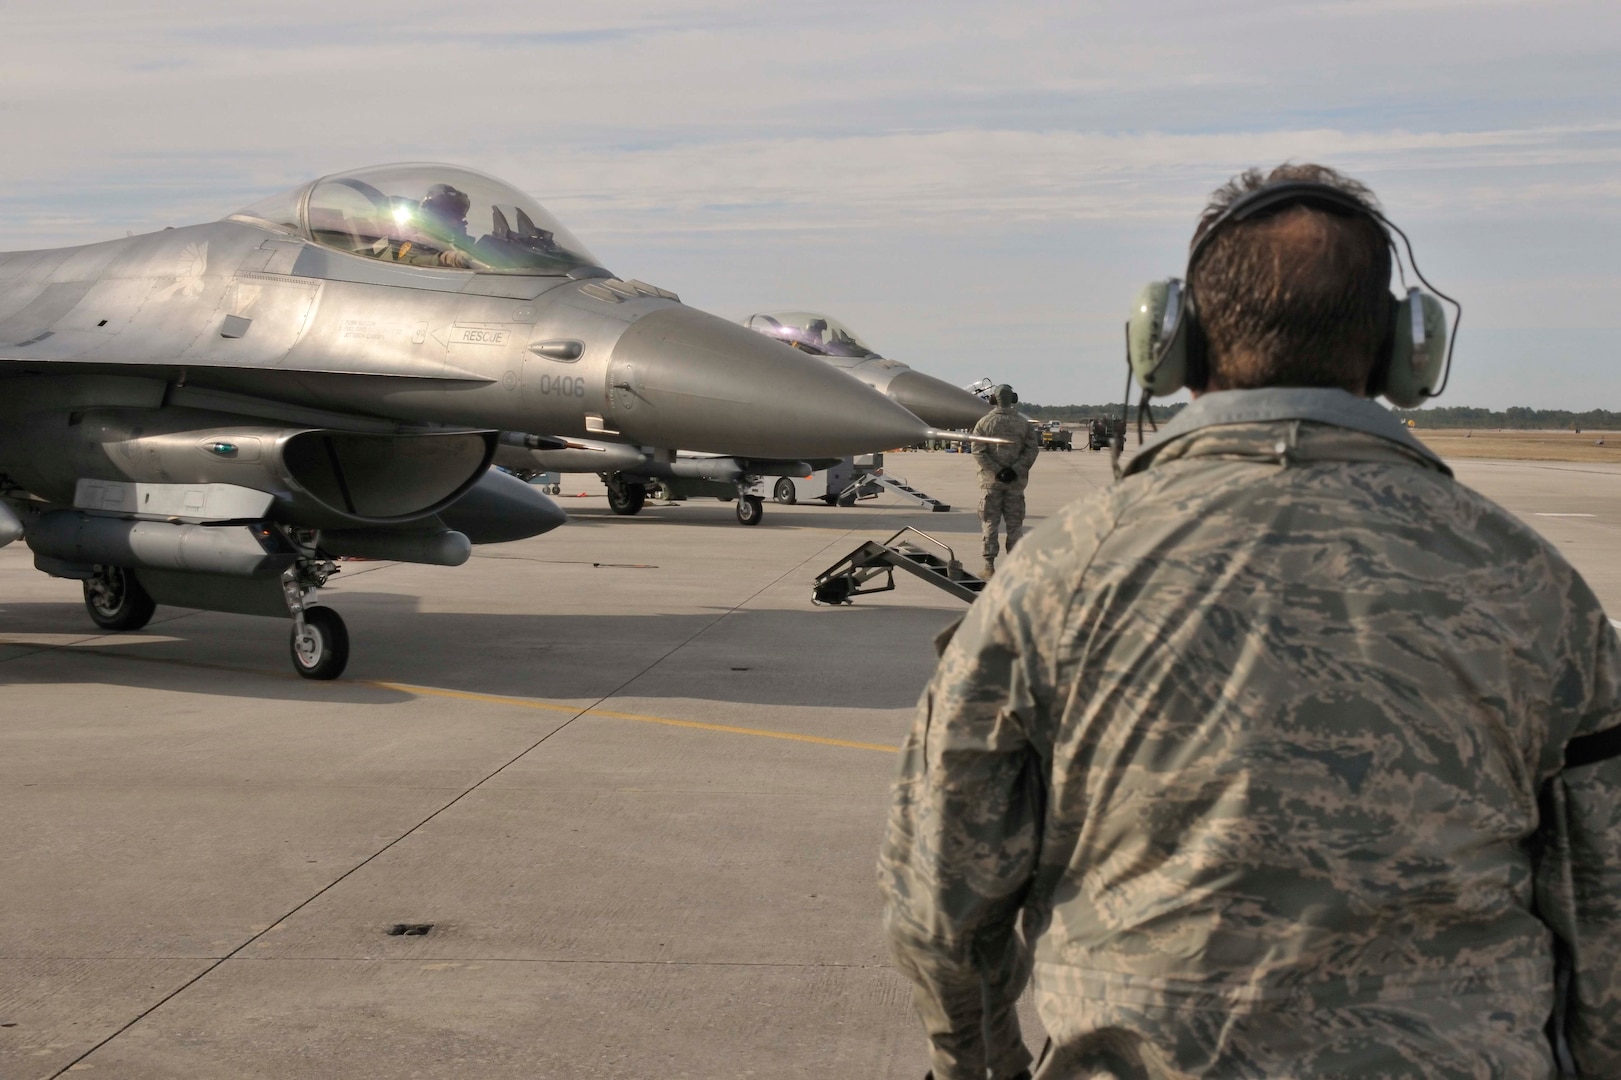 TYNDALL AIR FORCE BASE, Fla. - Maintainers from the 179th Fighter Squadron, a subordinate unit of the 148th Fighter Wing out of Duluth, Minn., prepare to launch F-16s for a mission at Tyndall Air Force Base, Fla., Jan. 27. The 148th FW is working with the 53rd Weapons Evaluation Group at Tyndall AFB for two weeks to train for their Air Sovereignty Alert missions and to validate their new Block 50 F-16s. 

(U.S. Air Force photo by Tech. Sgt. John Hoffmann) 



